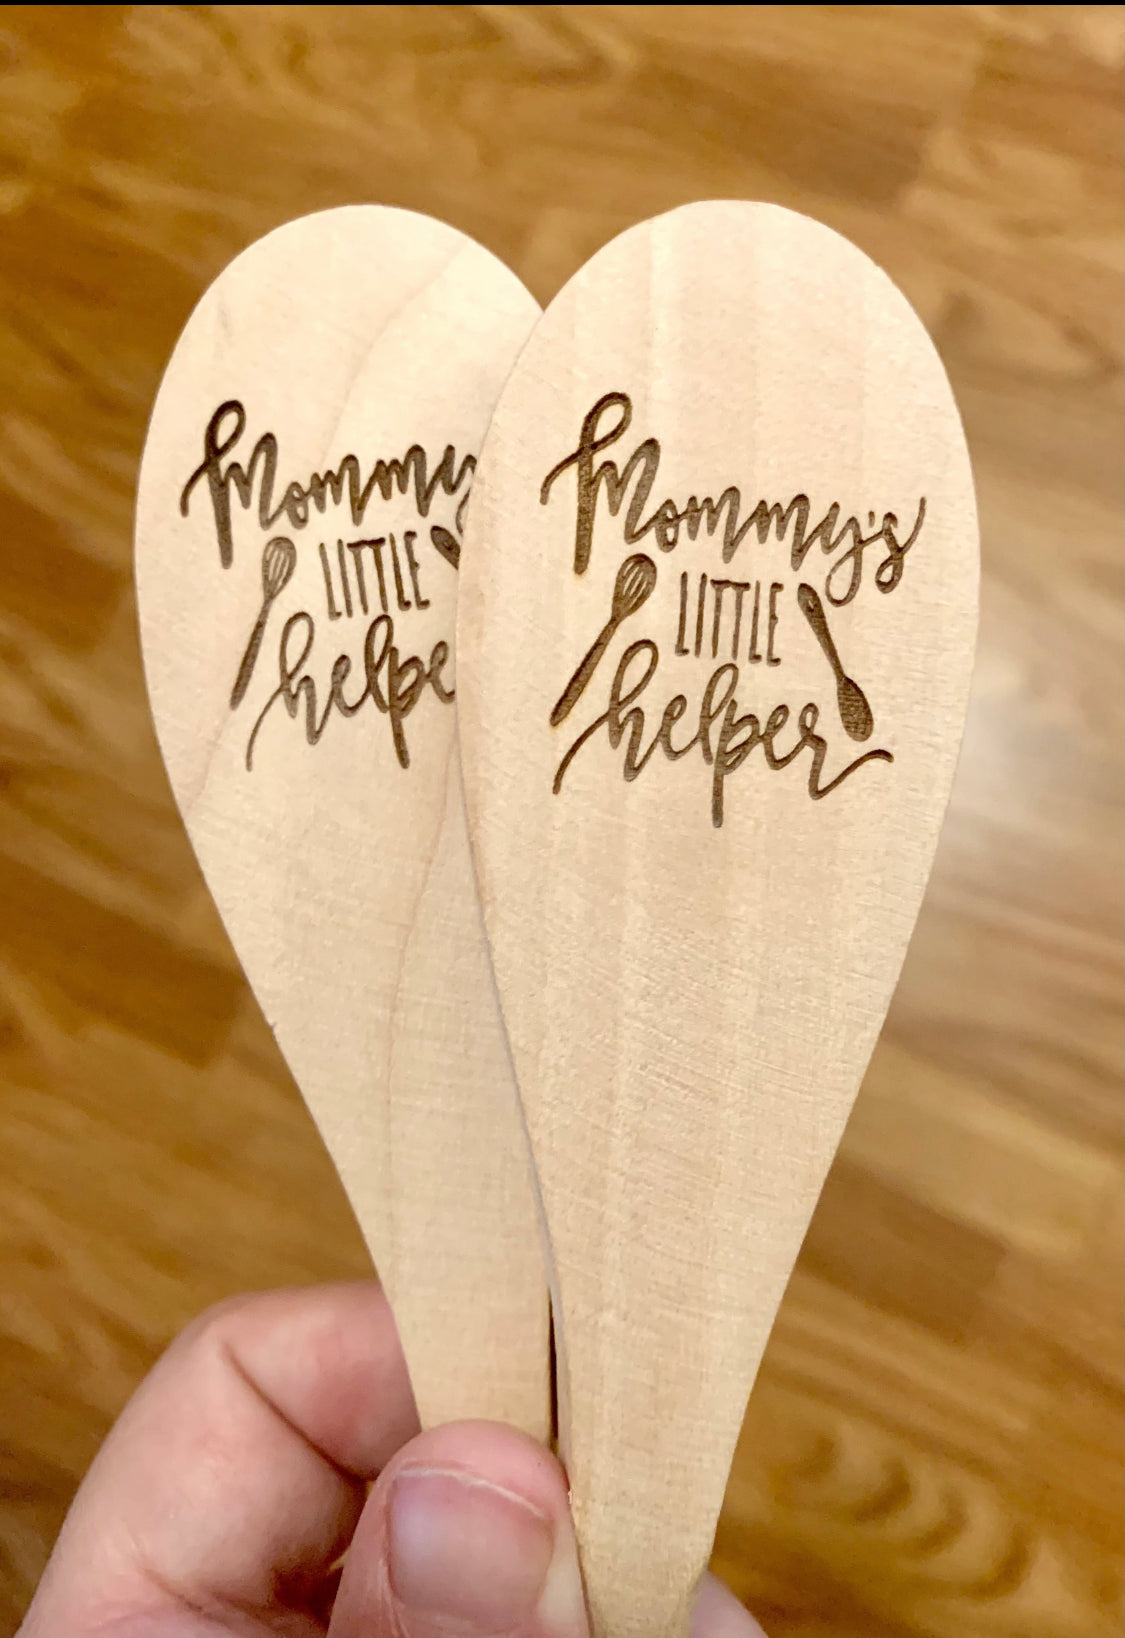 Wooden Engraved Spoons - MixMatched Creations